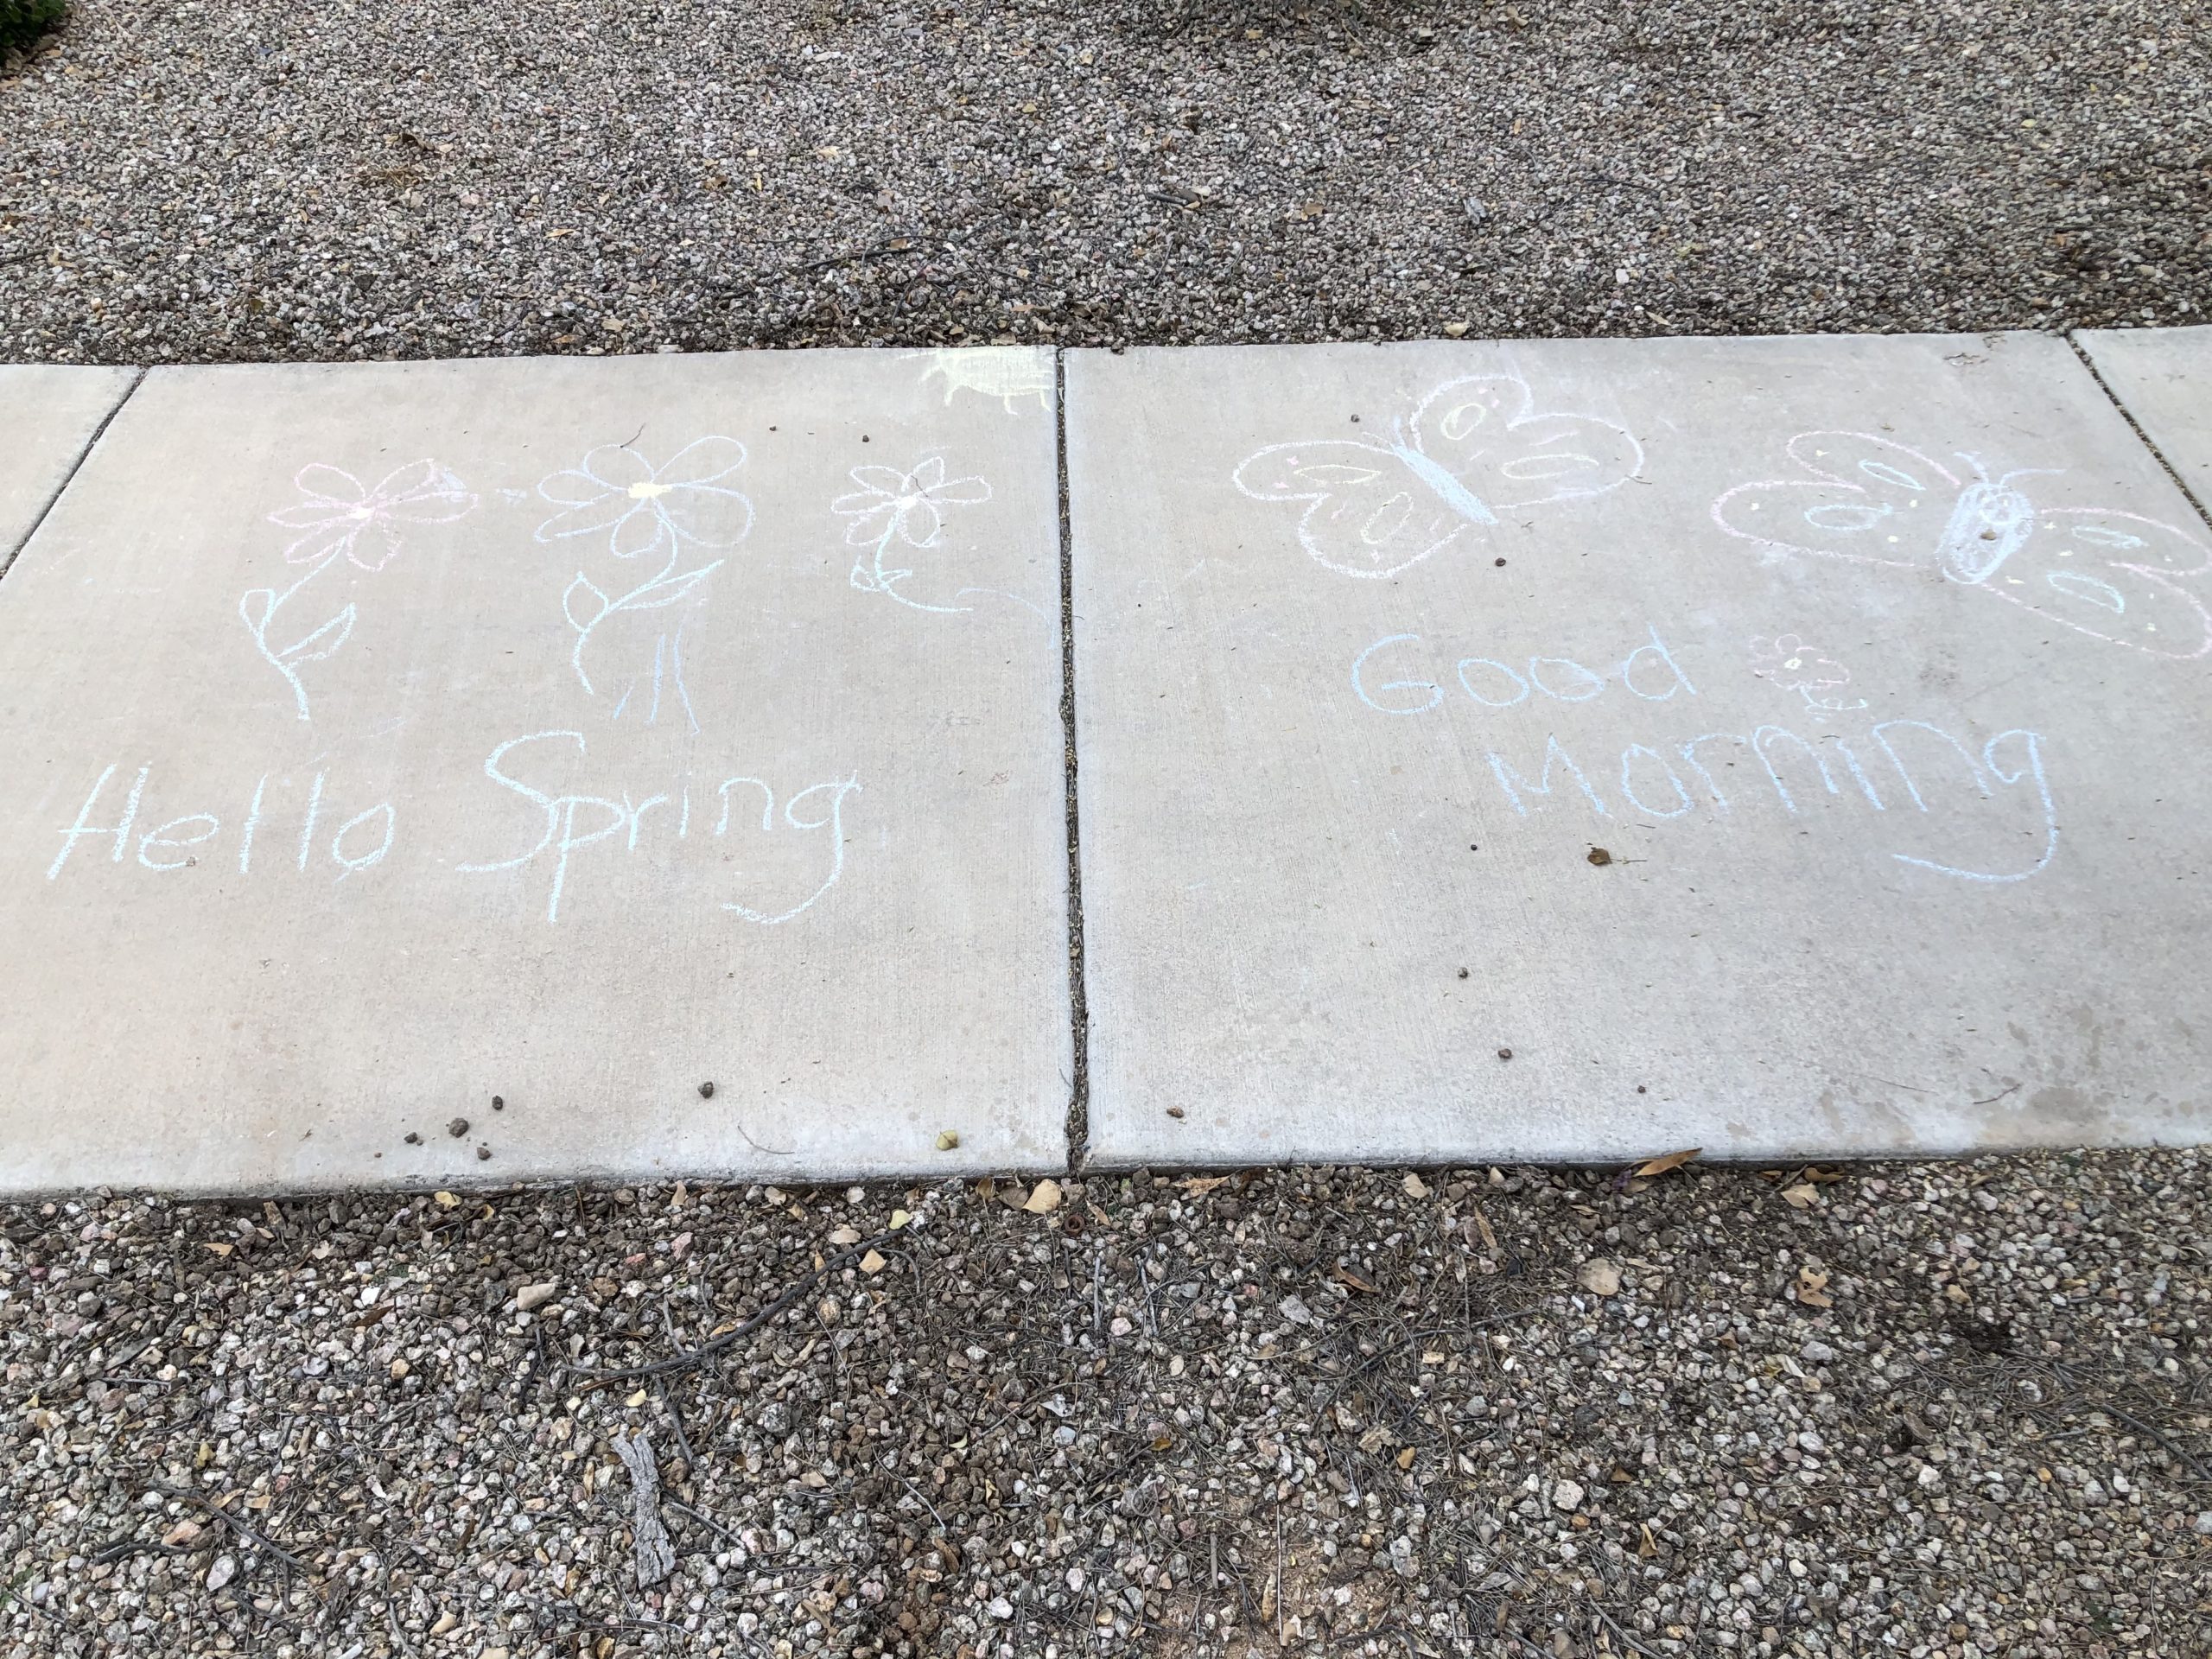 Sidewalk chalk drawings from kids can lead to health benefits of gratitude if you express gratitude for little things